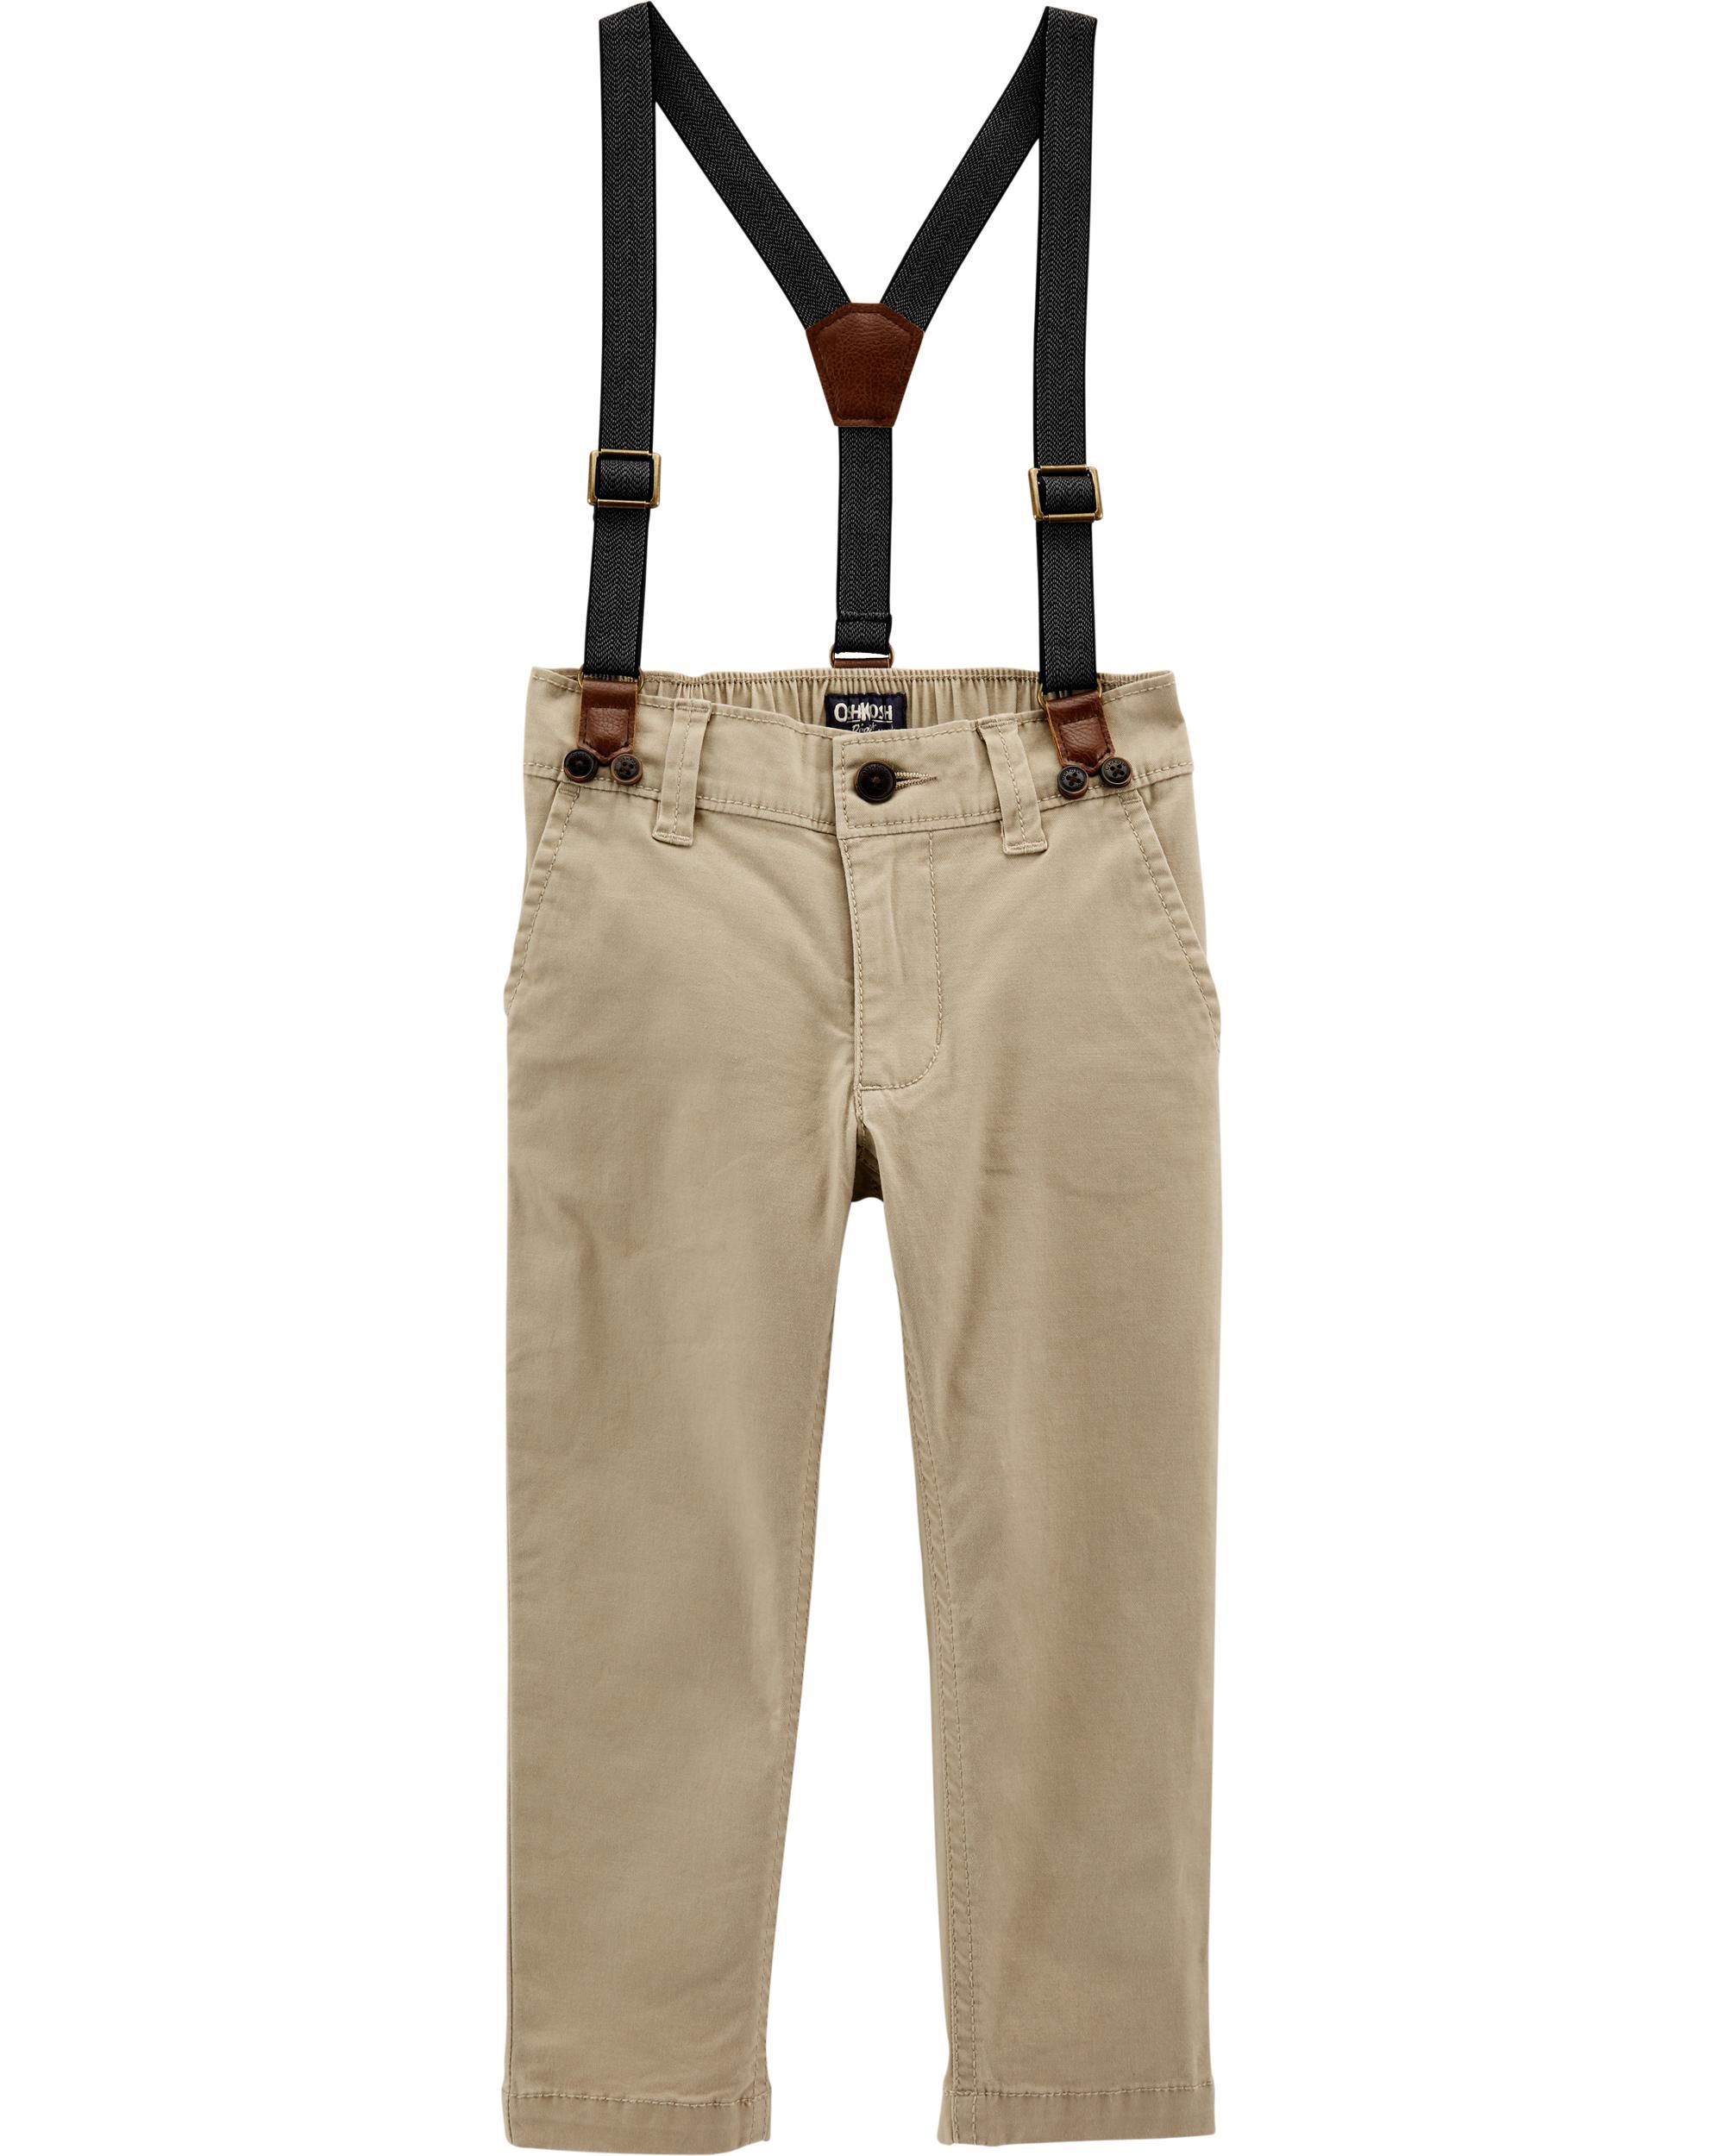 carters suspender outfit